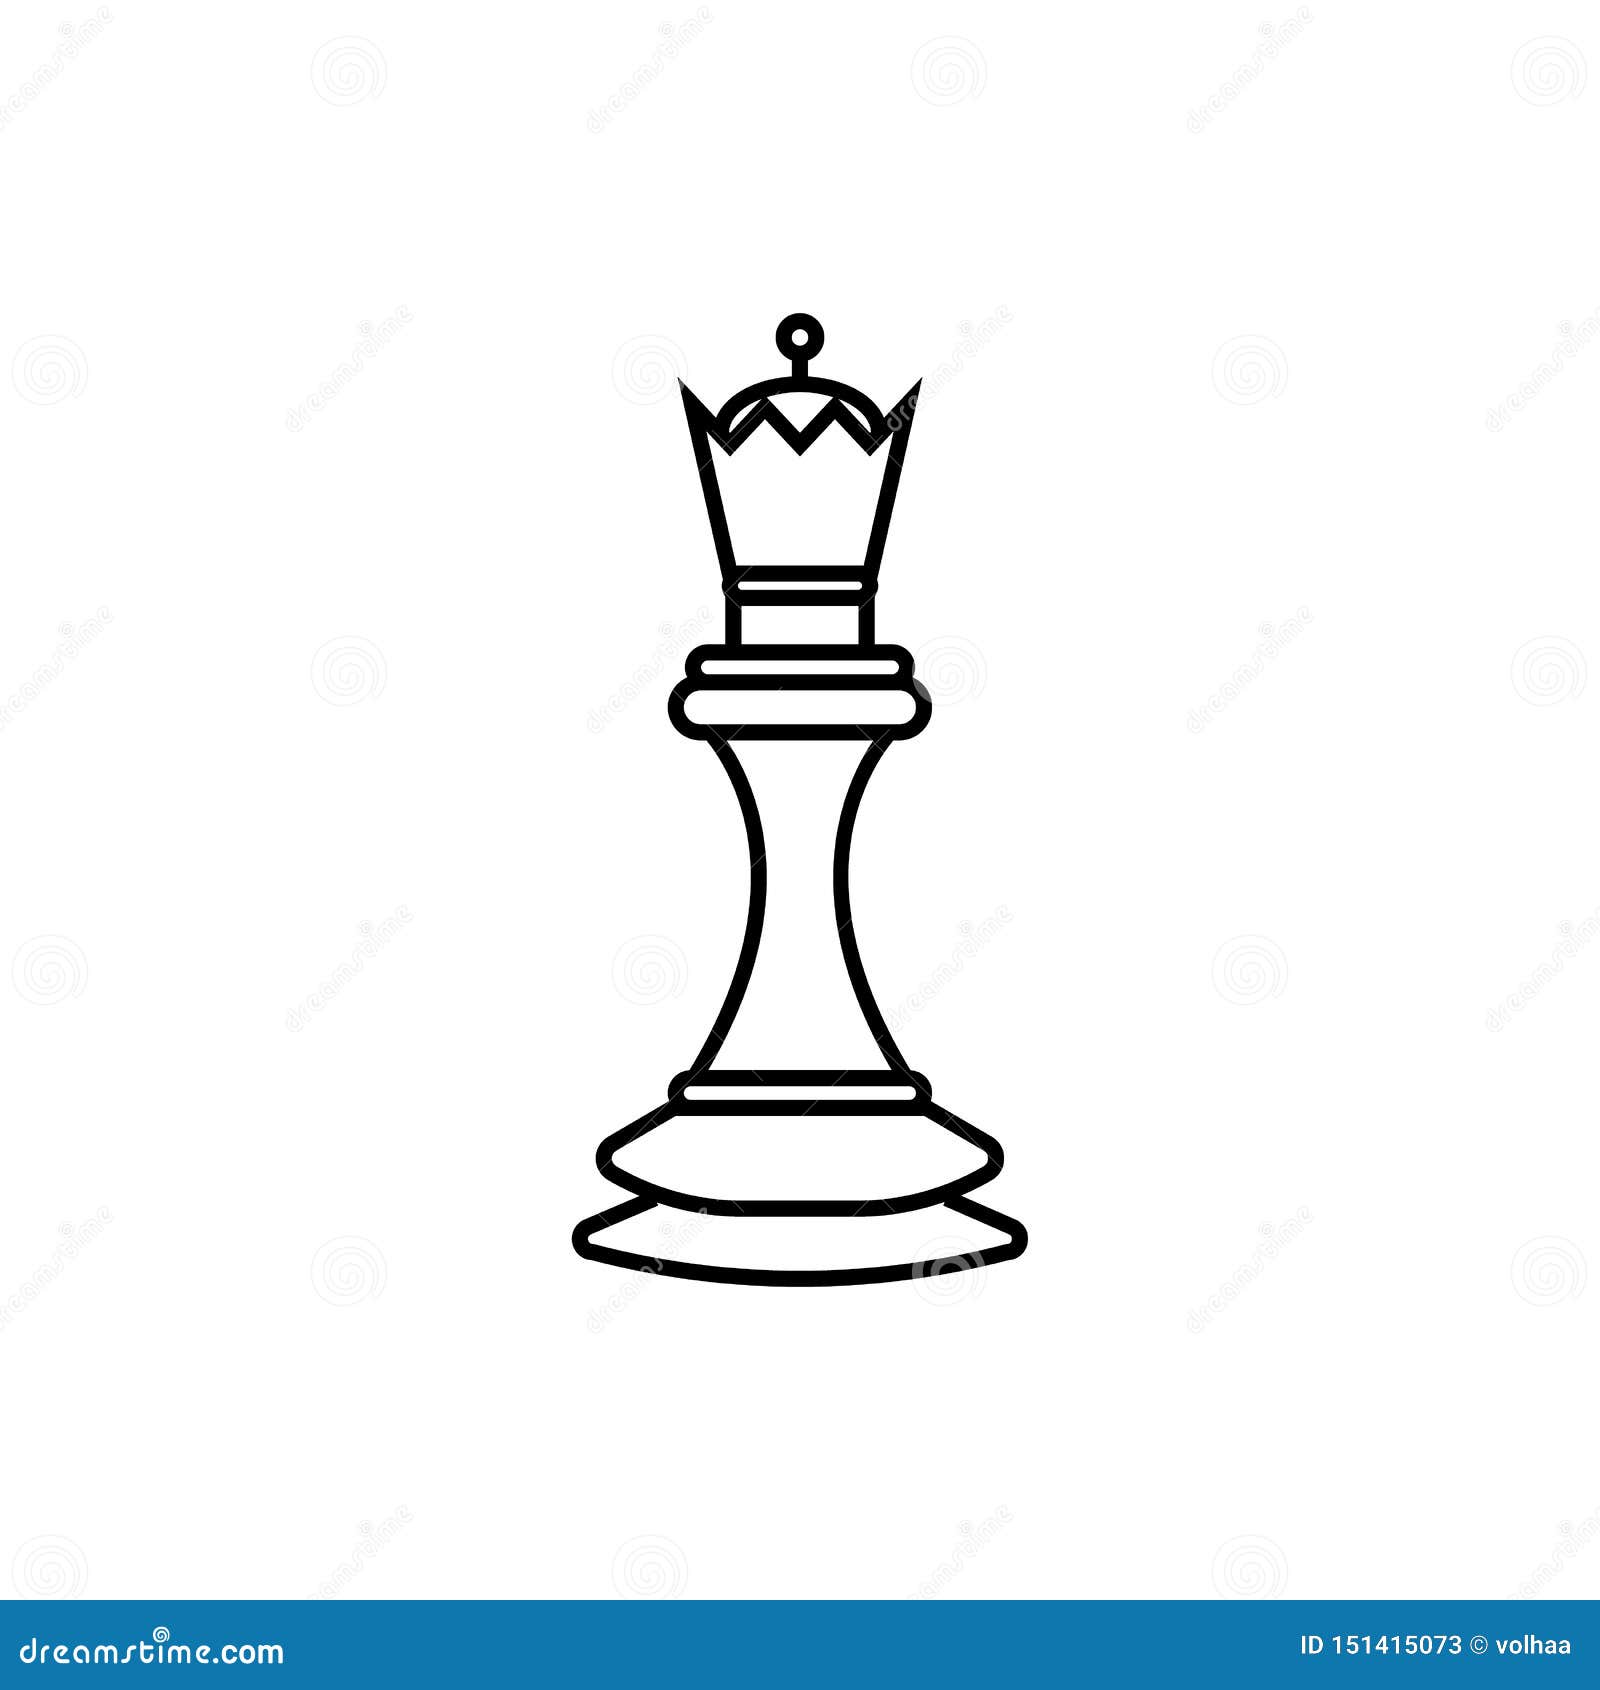 White chess queen stock vector. Illustration of game - 151415073